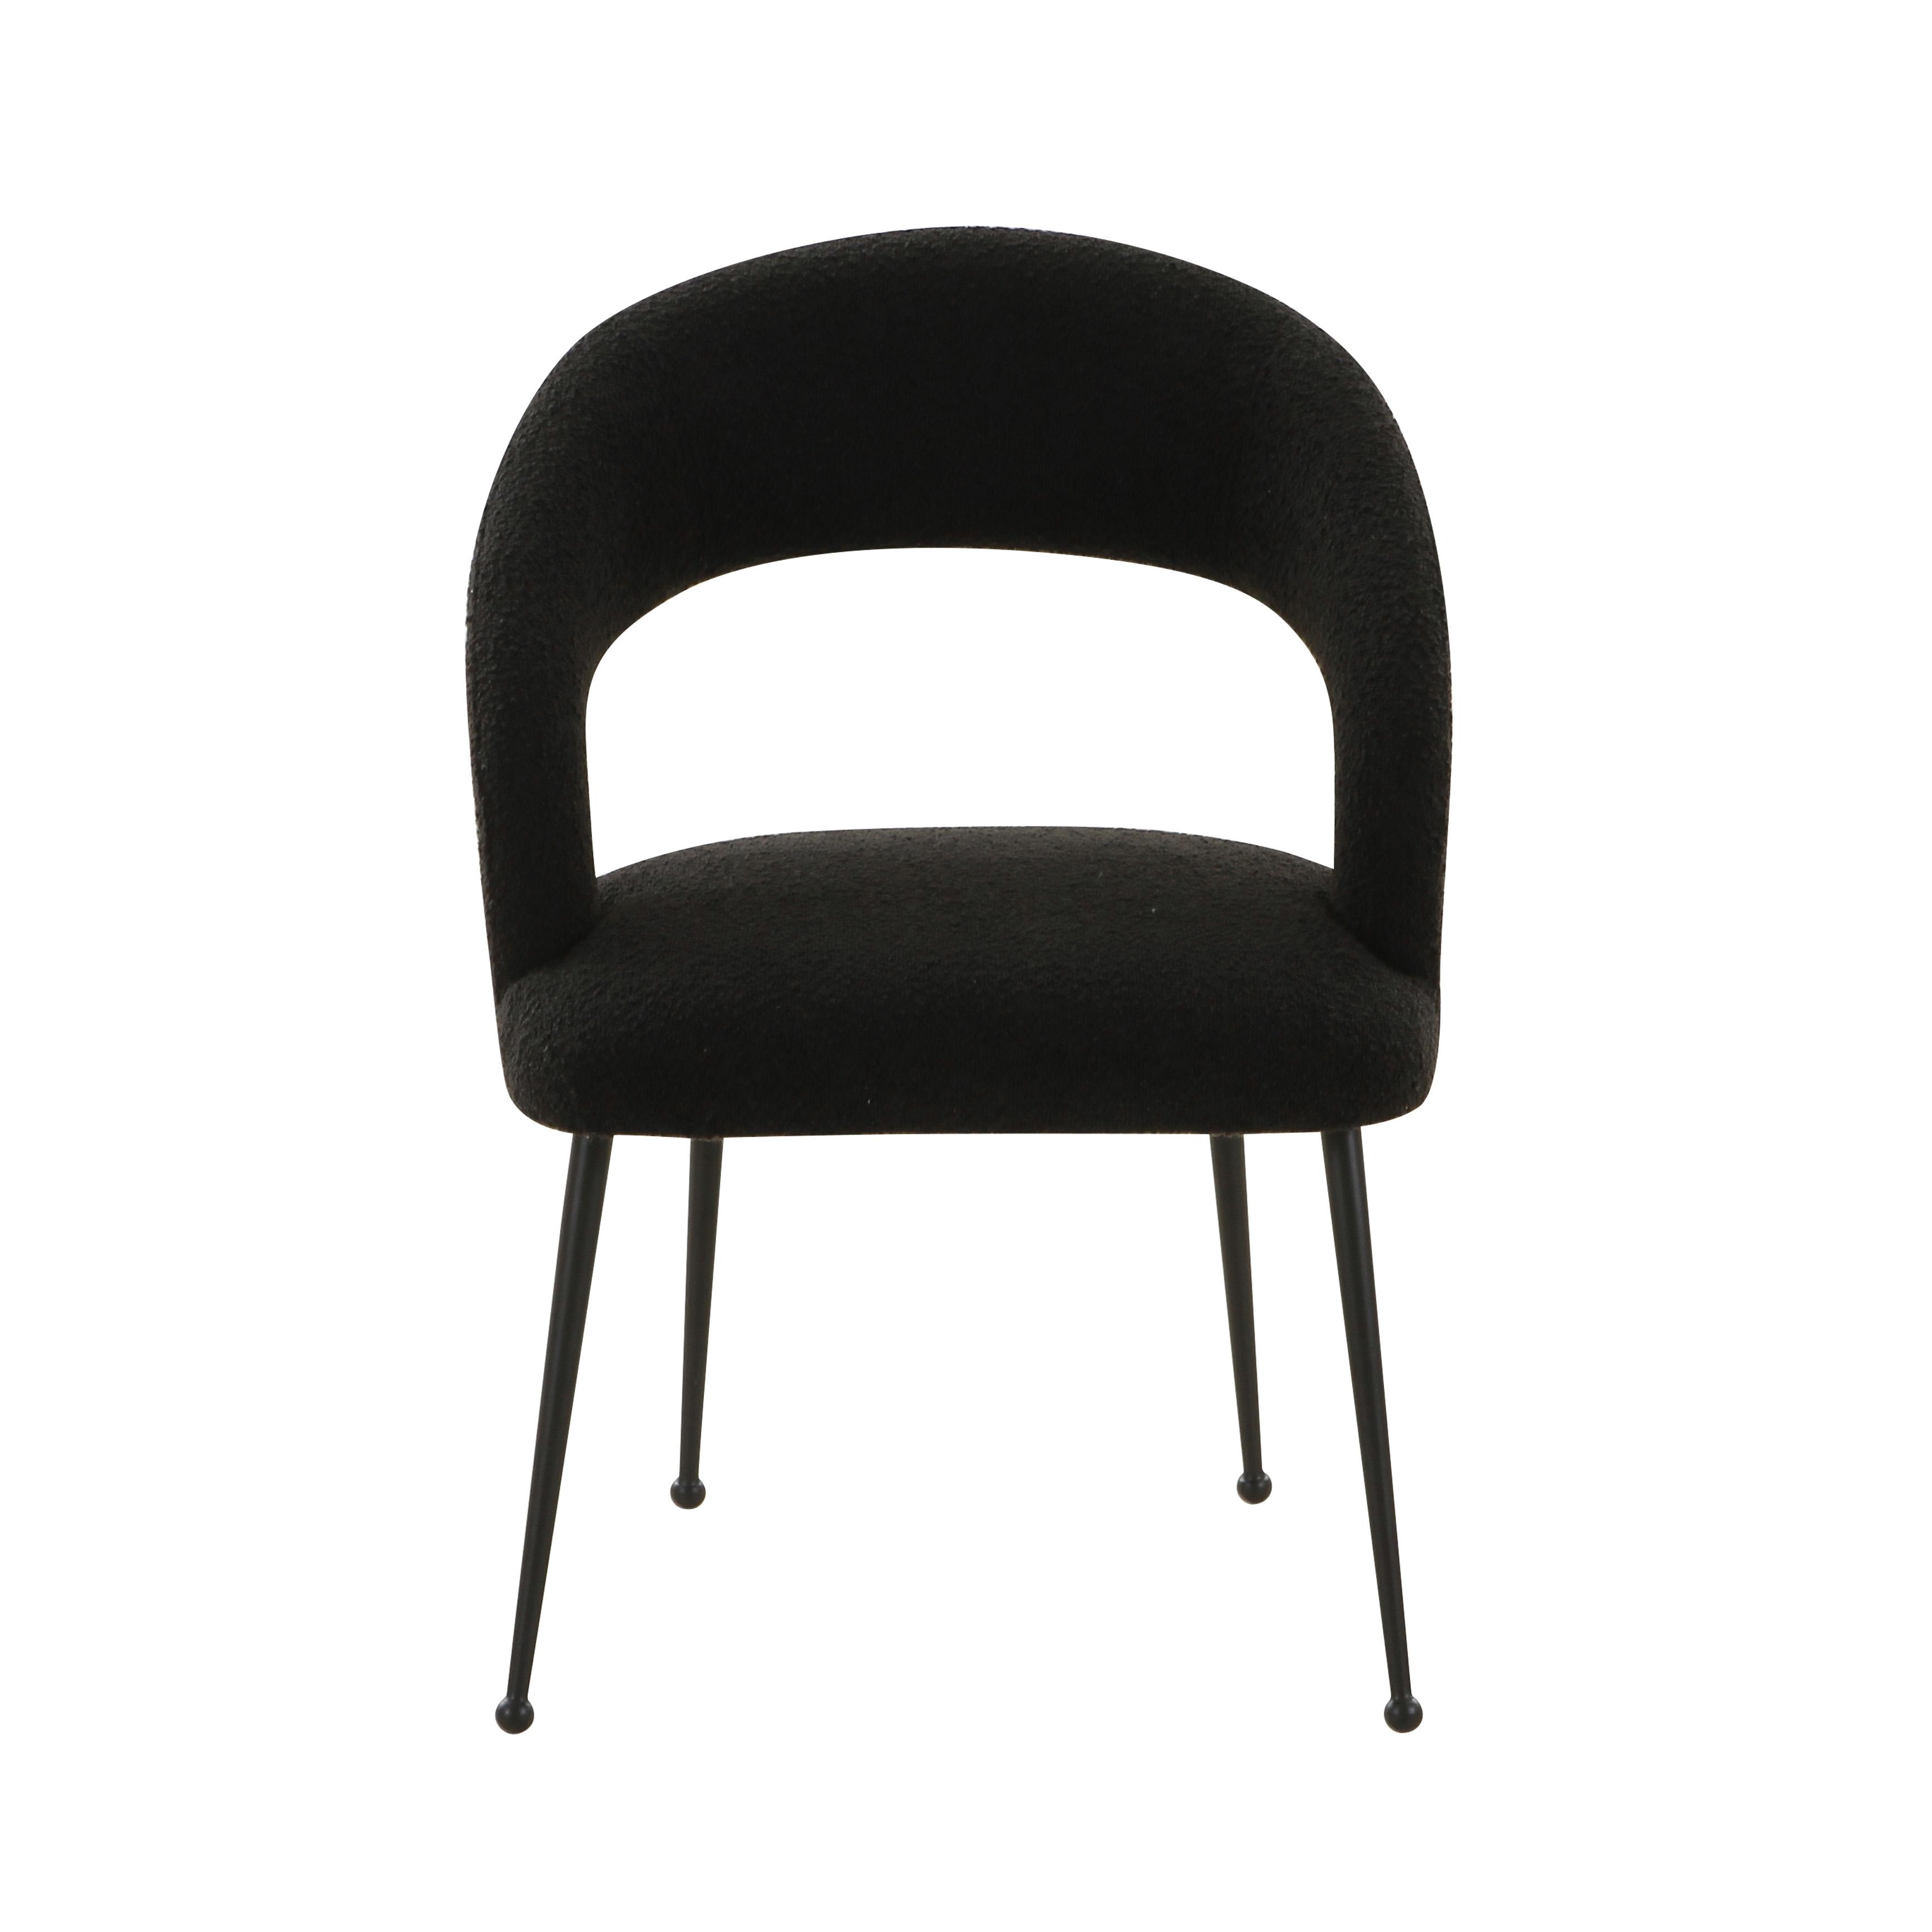 Rocco Black Boucle Dining Chair - Image 1